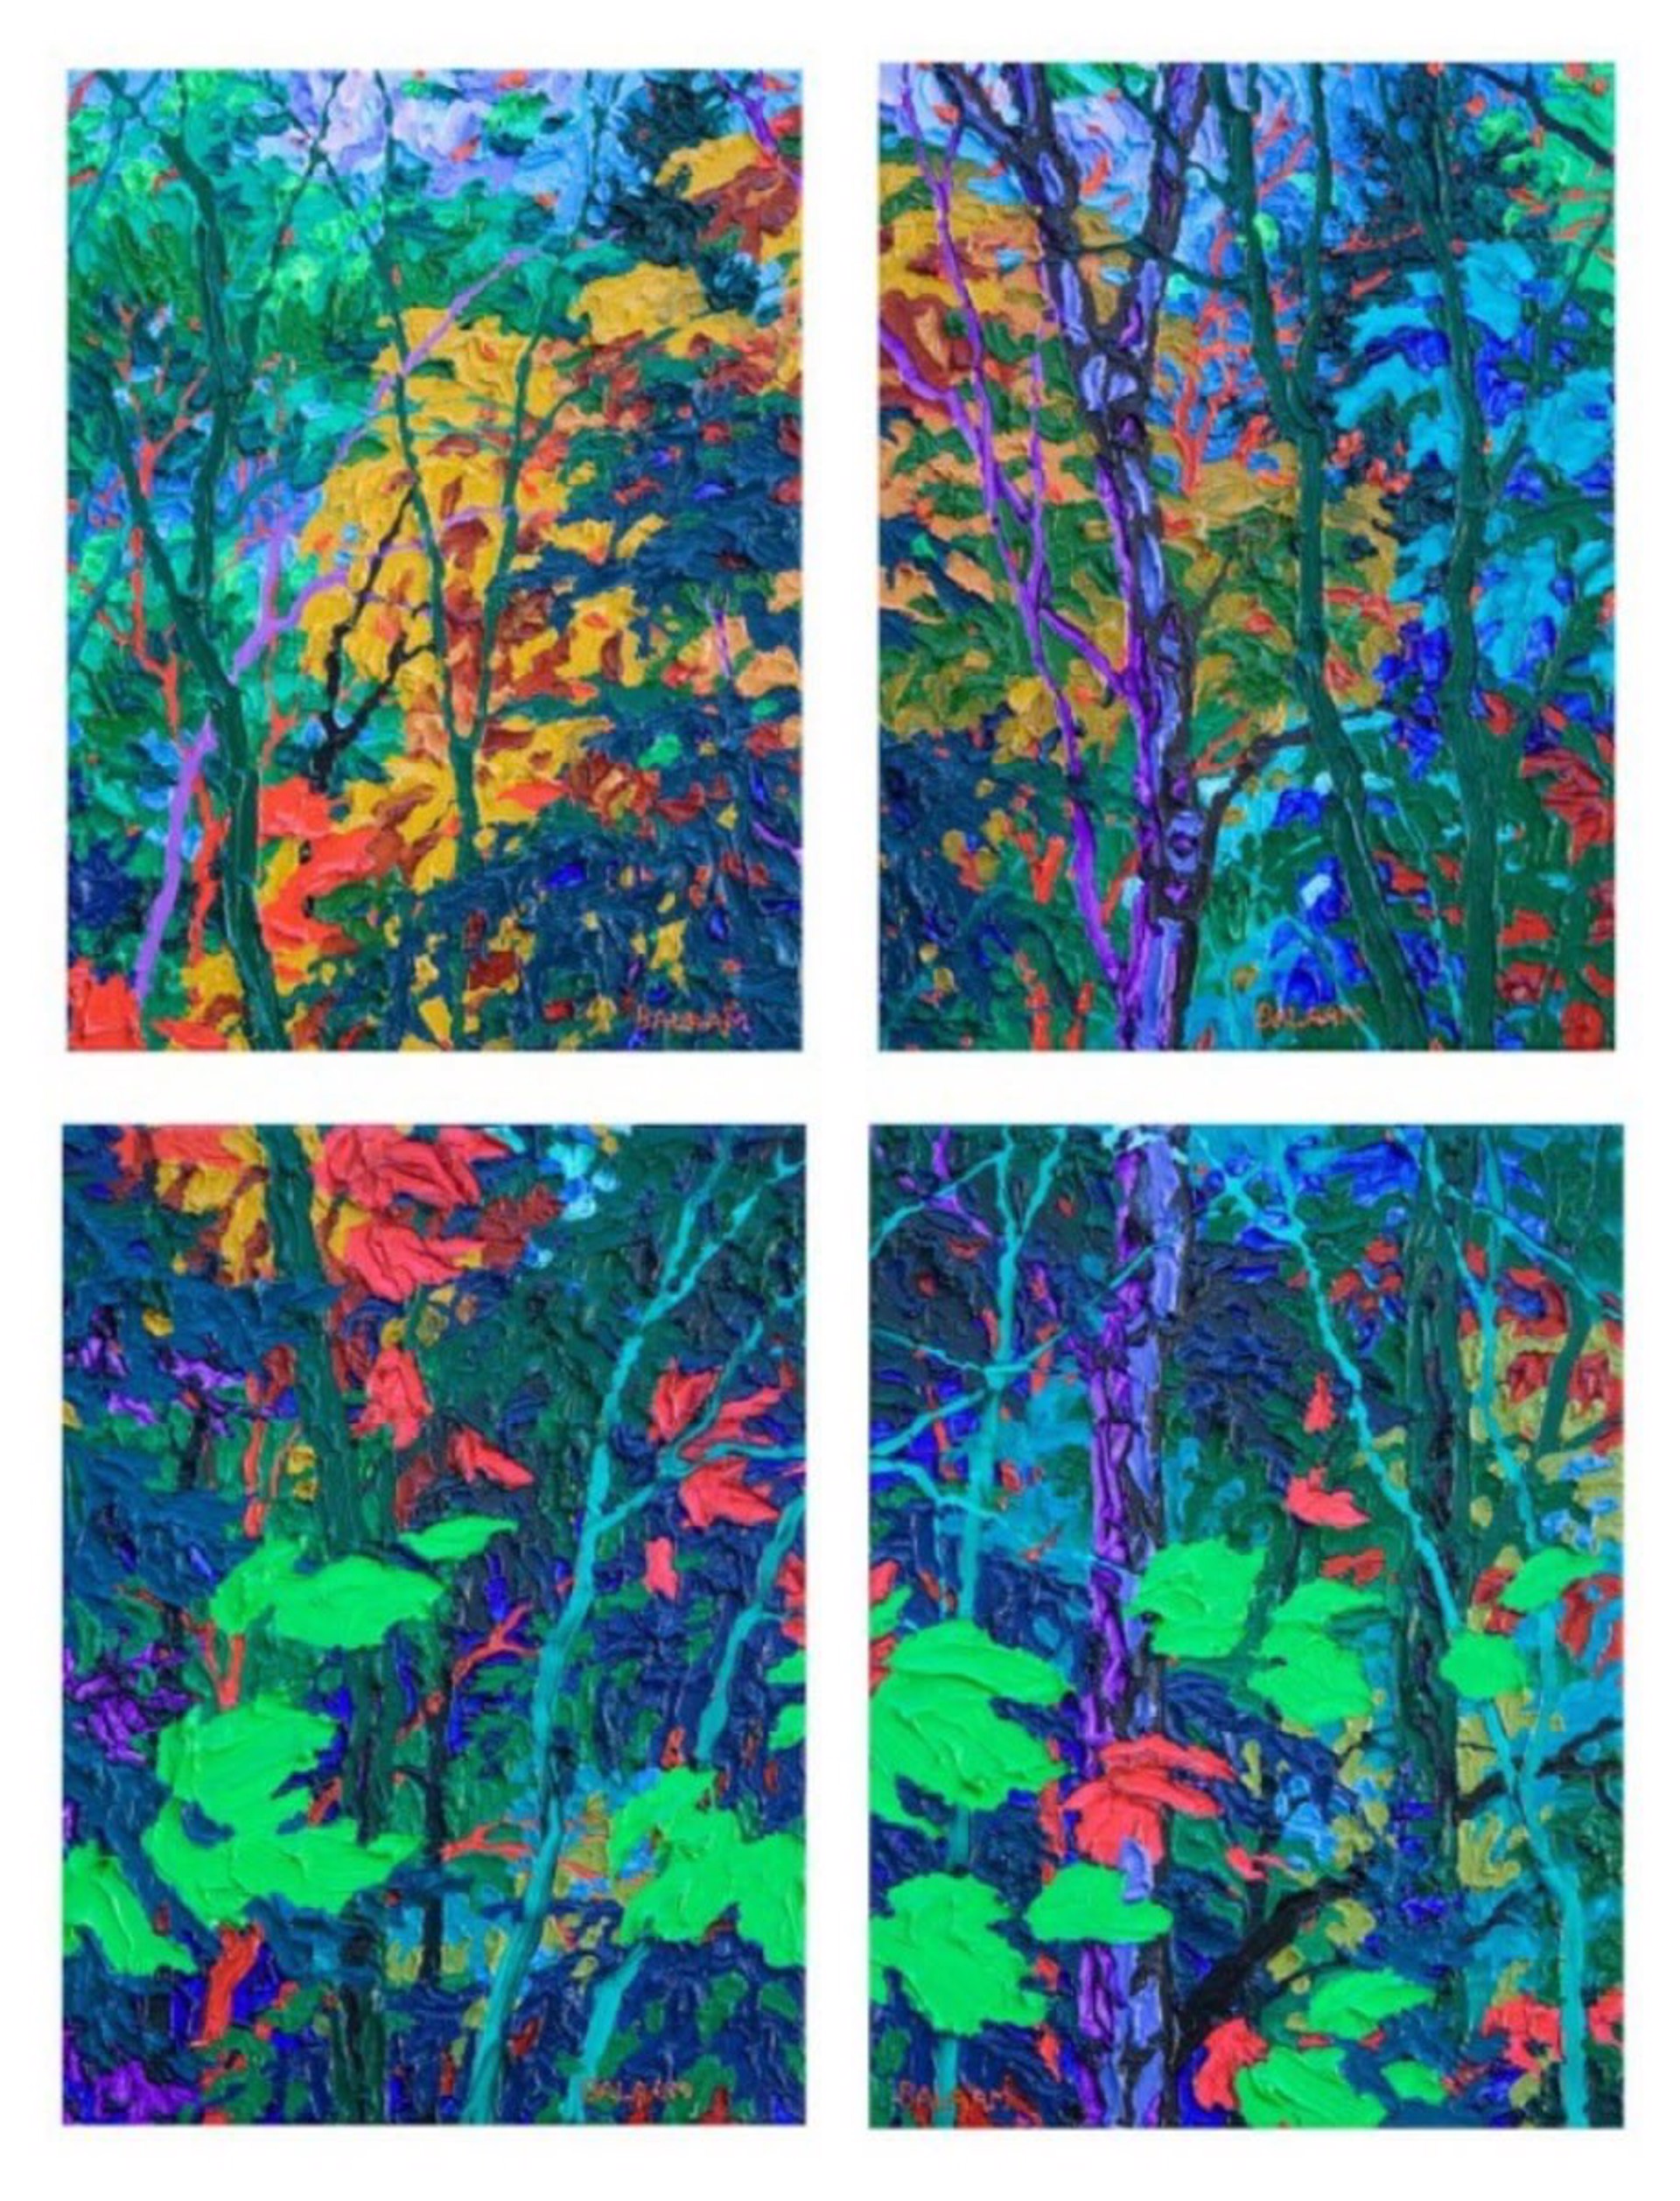 Gem - Moonlight in the Forest I,II,III,IV by Frank Balaam